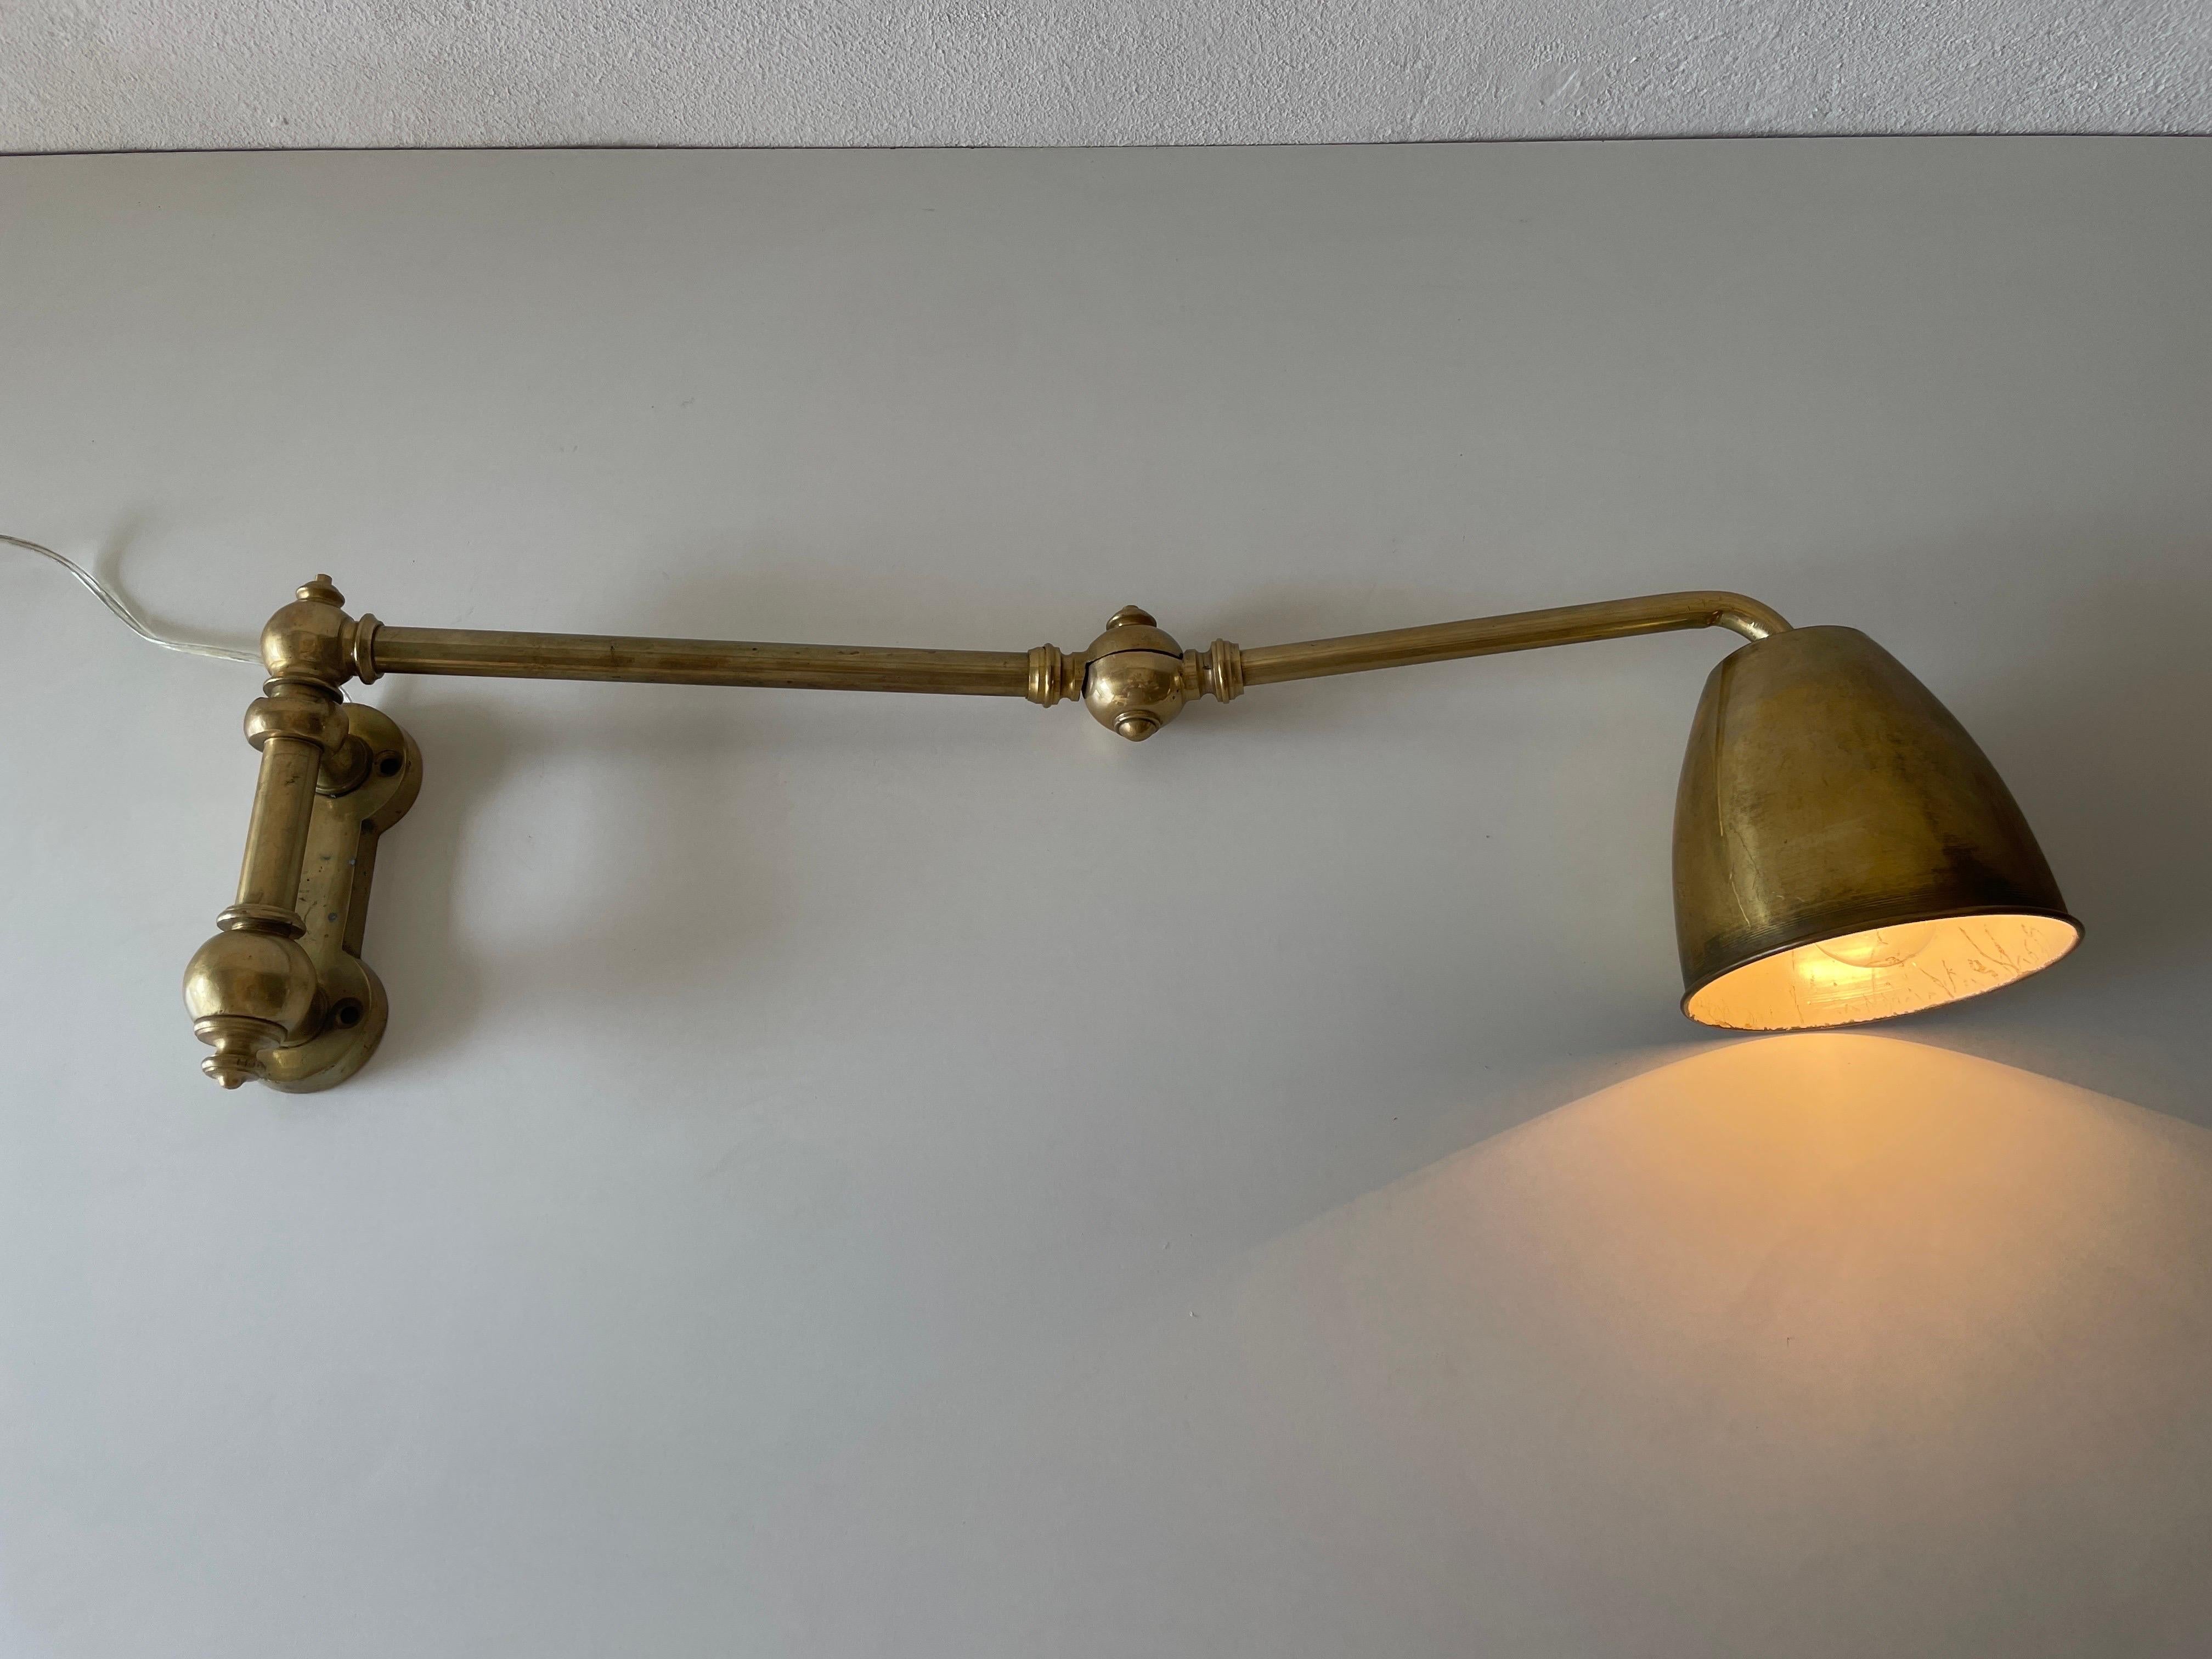 Full Brass Adjustable Head and Arm Industrial Task Wall Lamp, 1940s, Germany For Sale 5